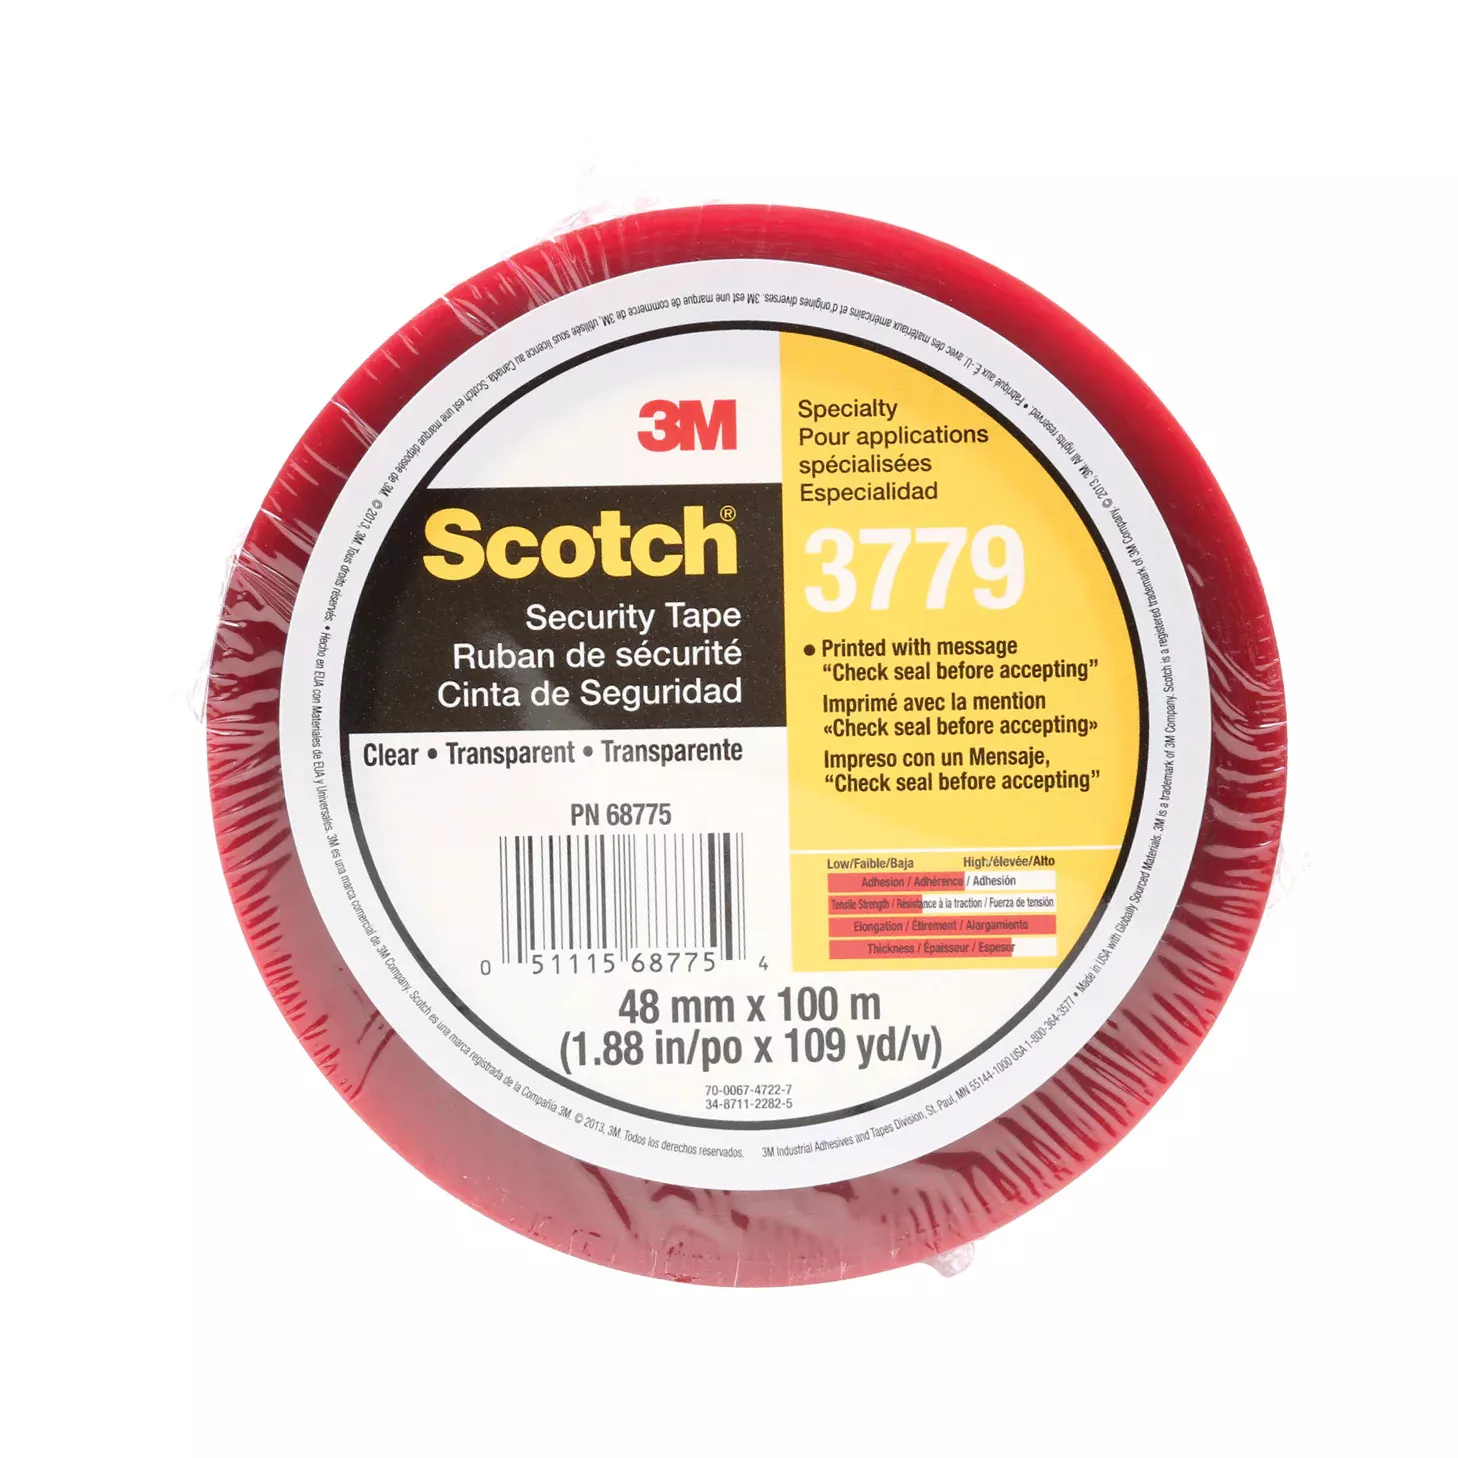 Scotch® Security Message Box Sealing Tape 3779, Clear, 48 mm x 100 m,
36/Case